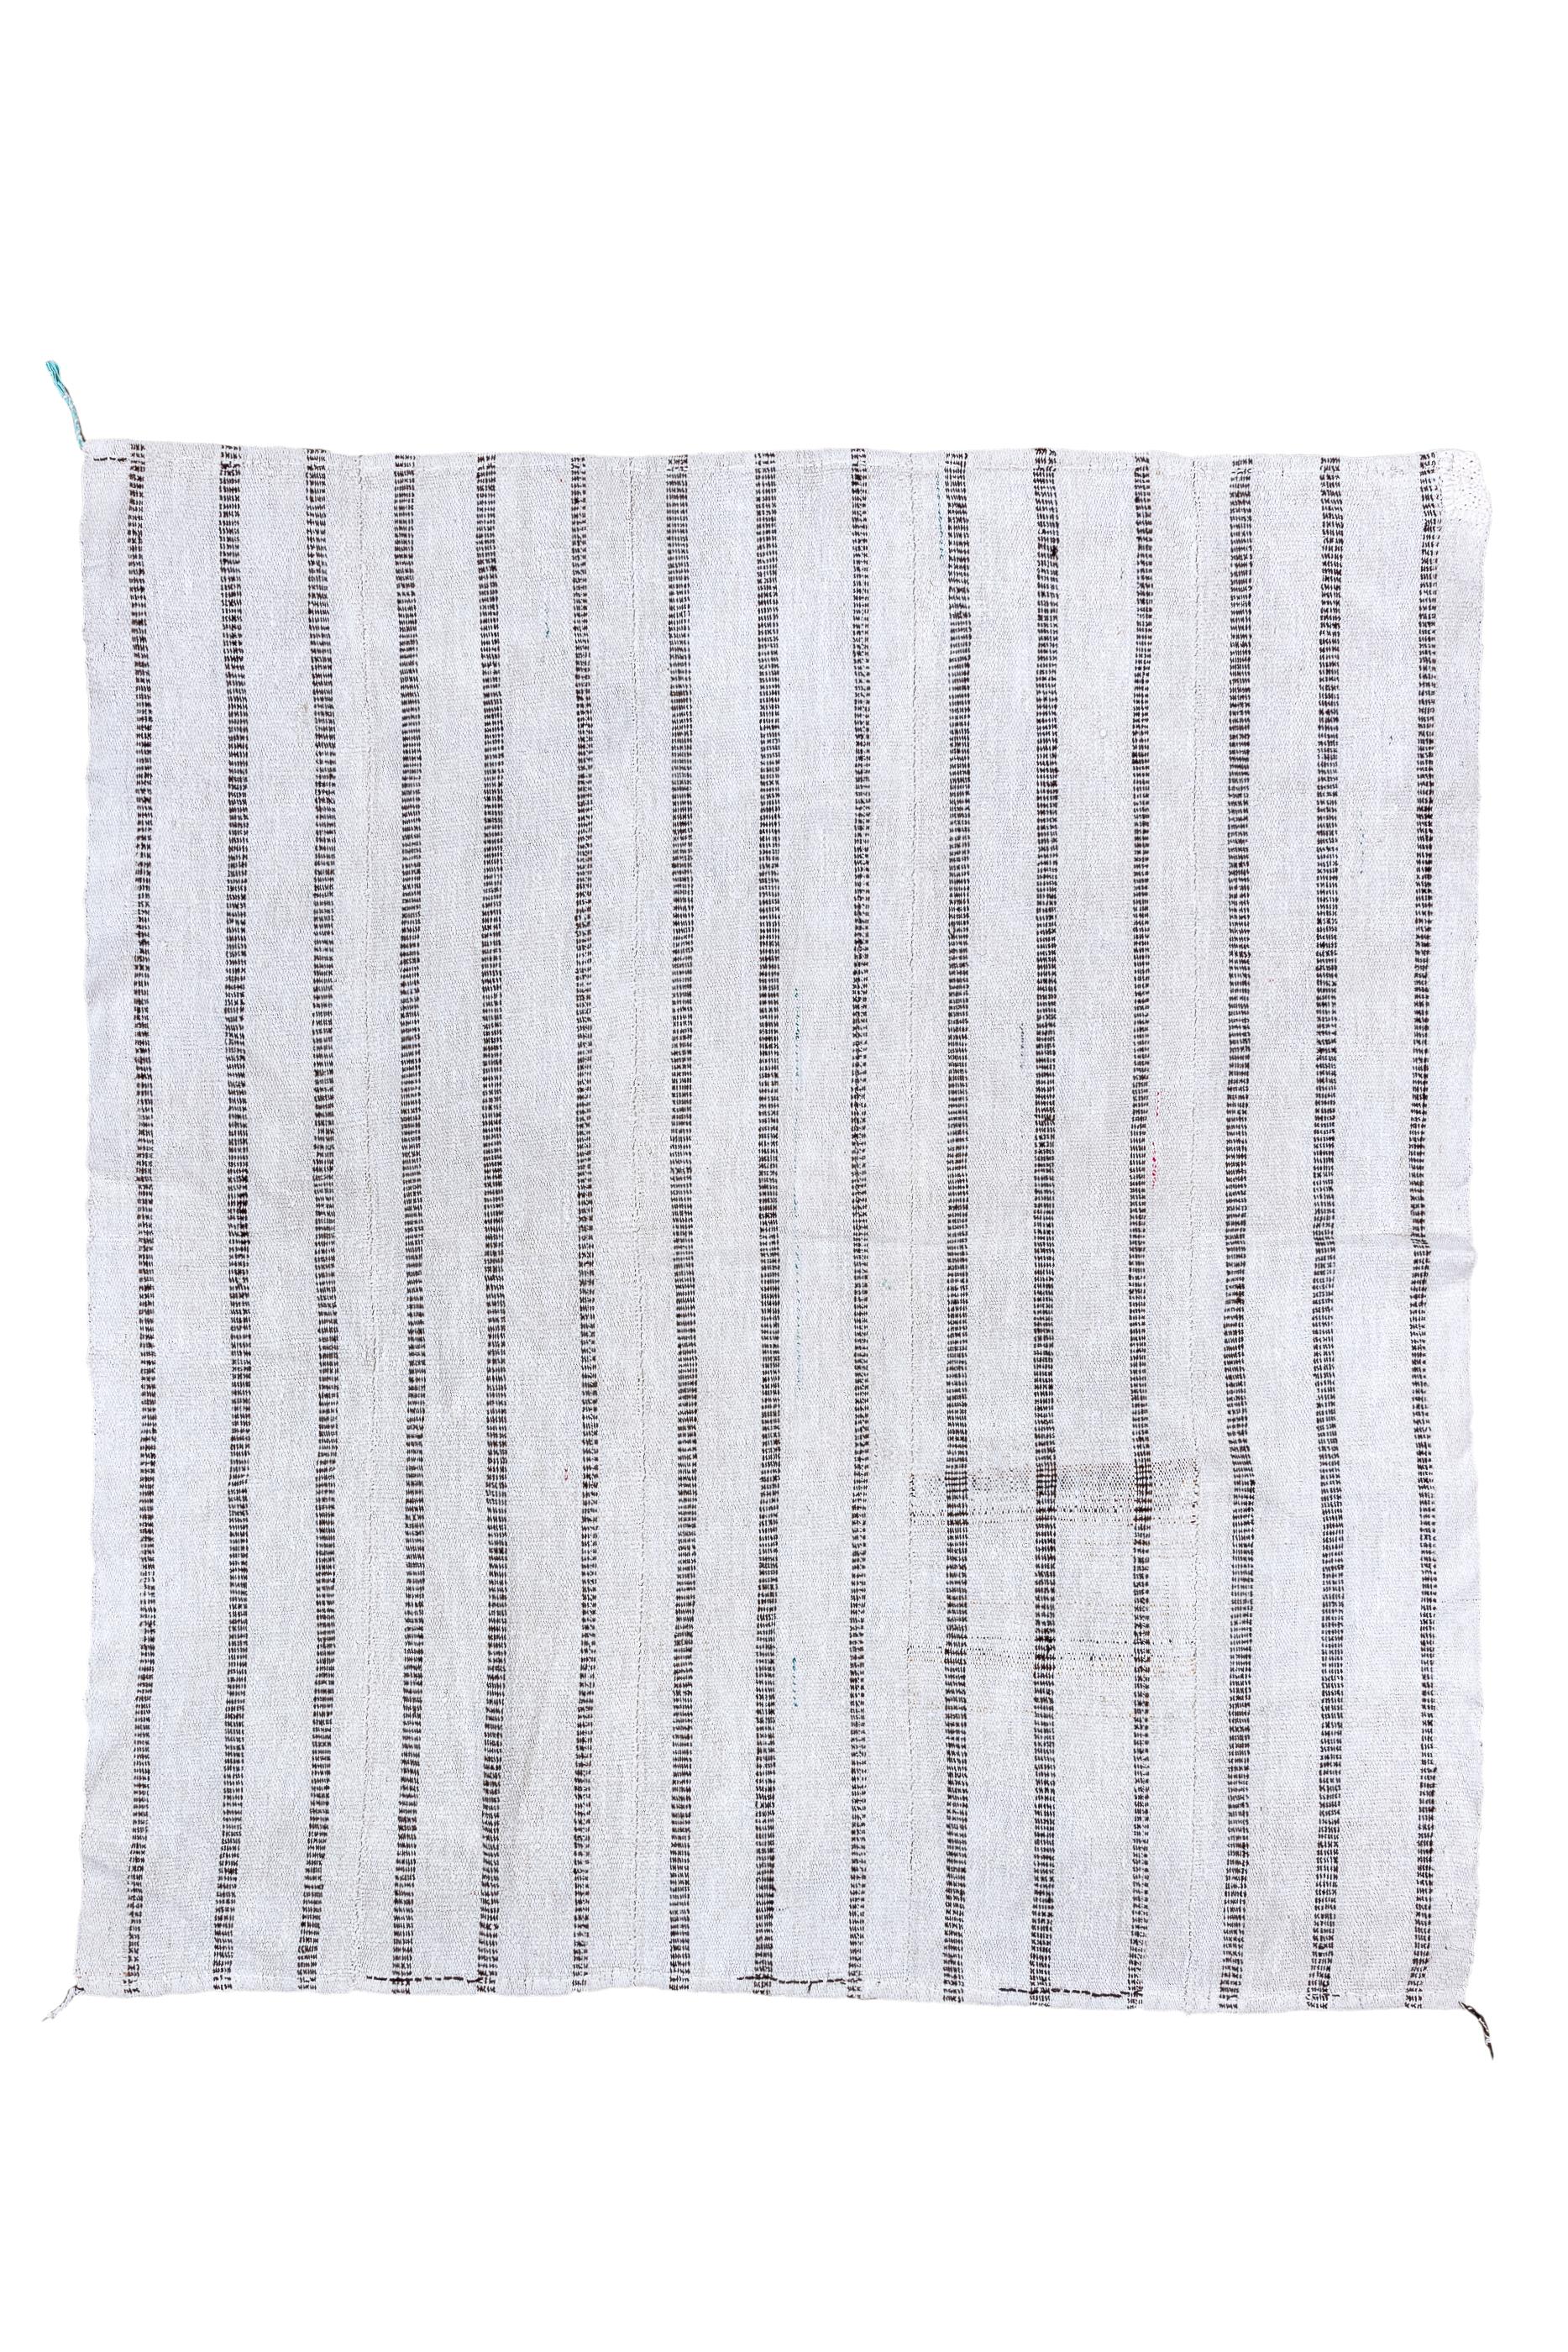 This flatwoven piece shows fifteen vertical stripes with micro-striations uniformly within, on a borderless, ecru ground. Adjustable dimensions. As new condition.

Rug Measures 
4'8x5.